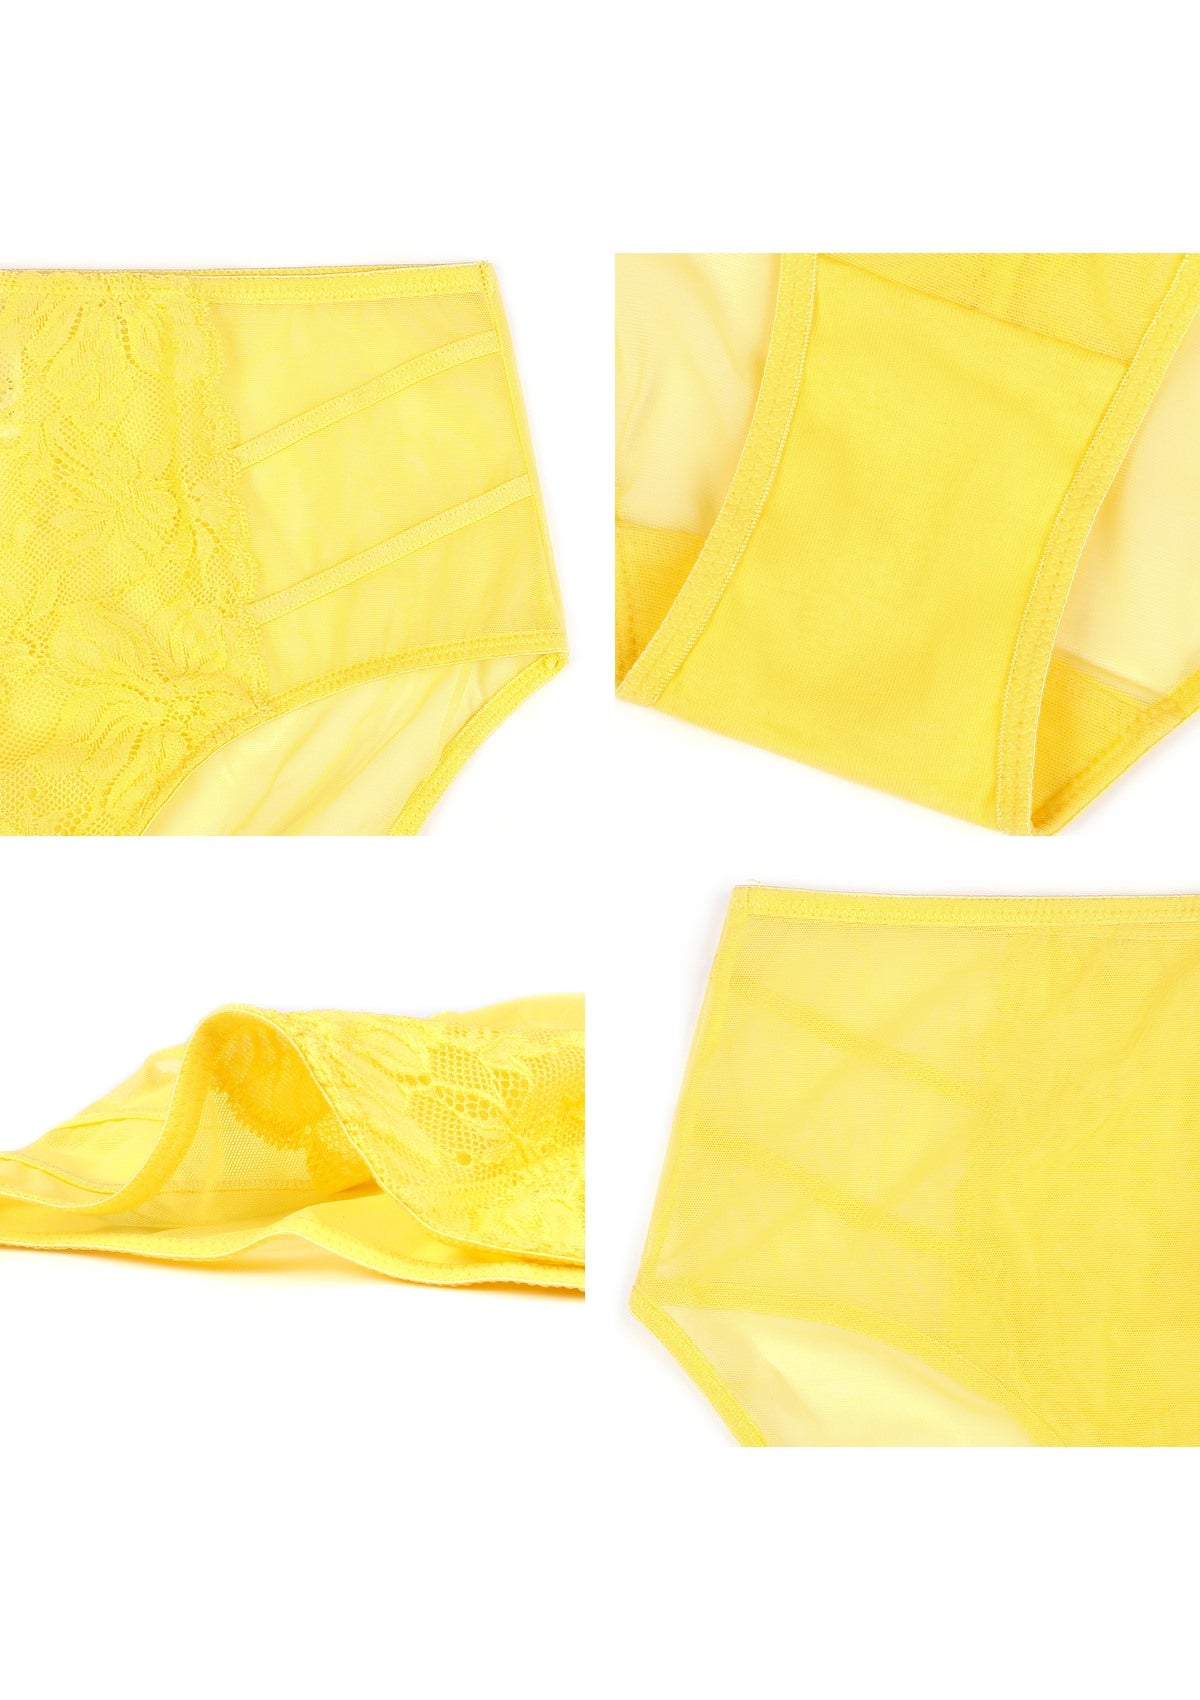 HSIA Spring Romance High-Rise Floral Lacy Panty-Comfort In Style - XXL / Bright Yellow